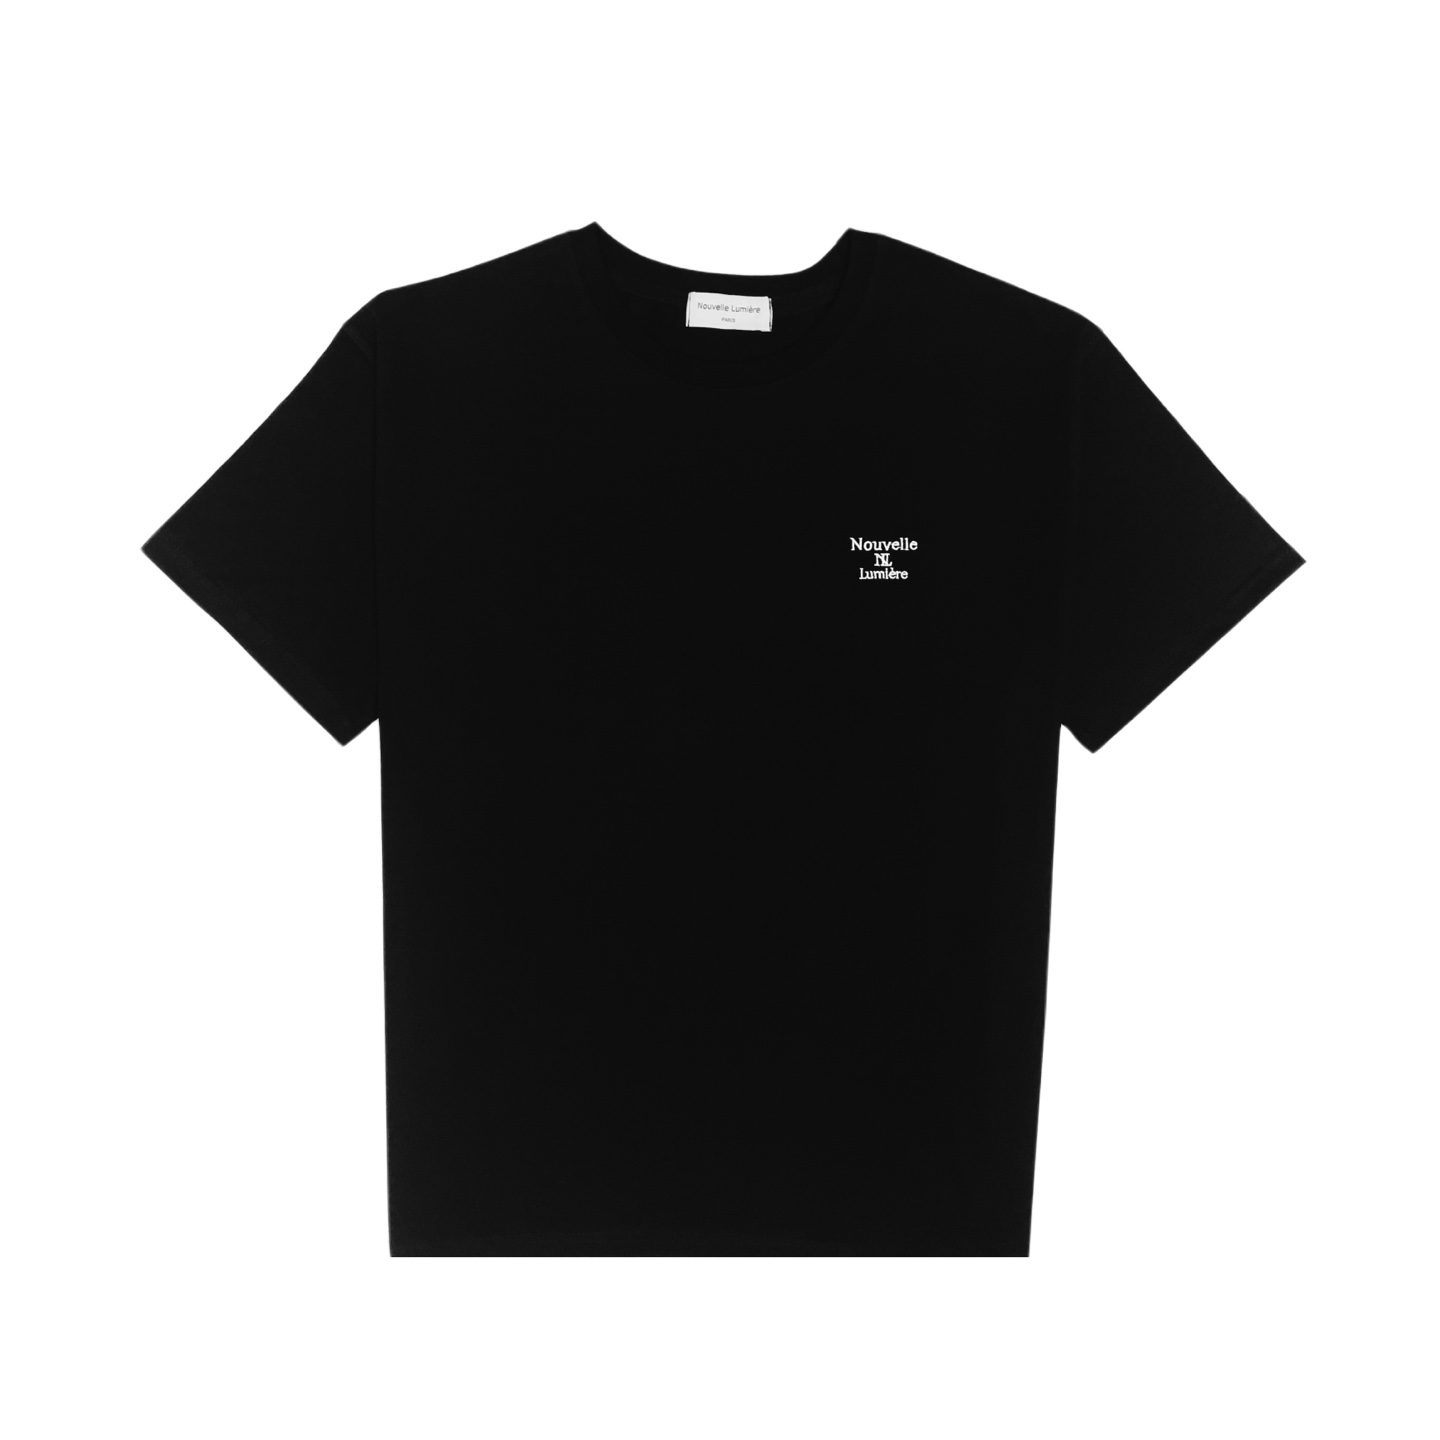 Nubelmiere Classic Embroidery Logo Black Short-Sleeved T-Shirt